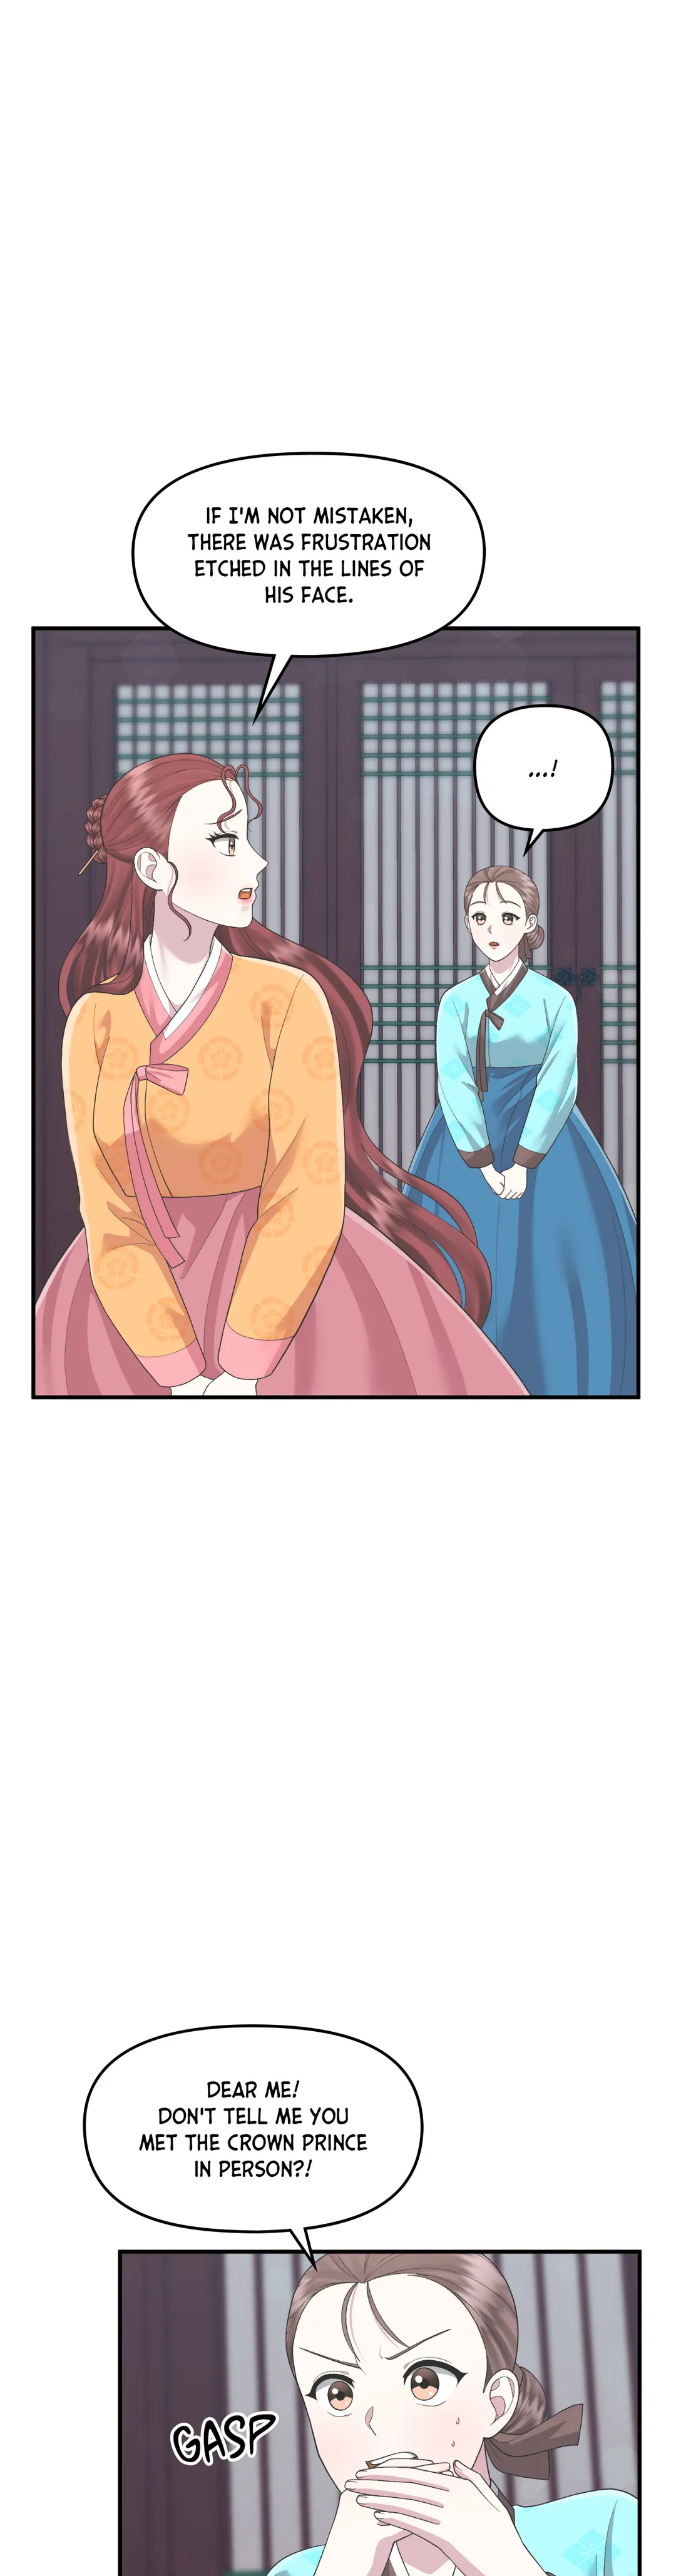 Cheer Up, Your Highness! - Page 3